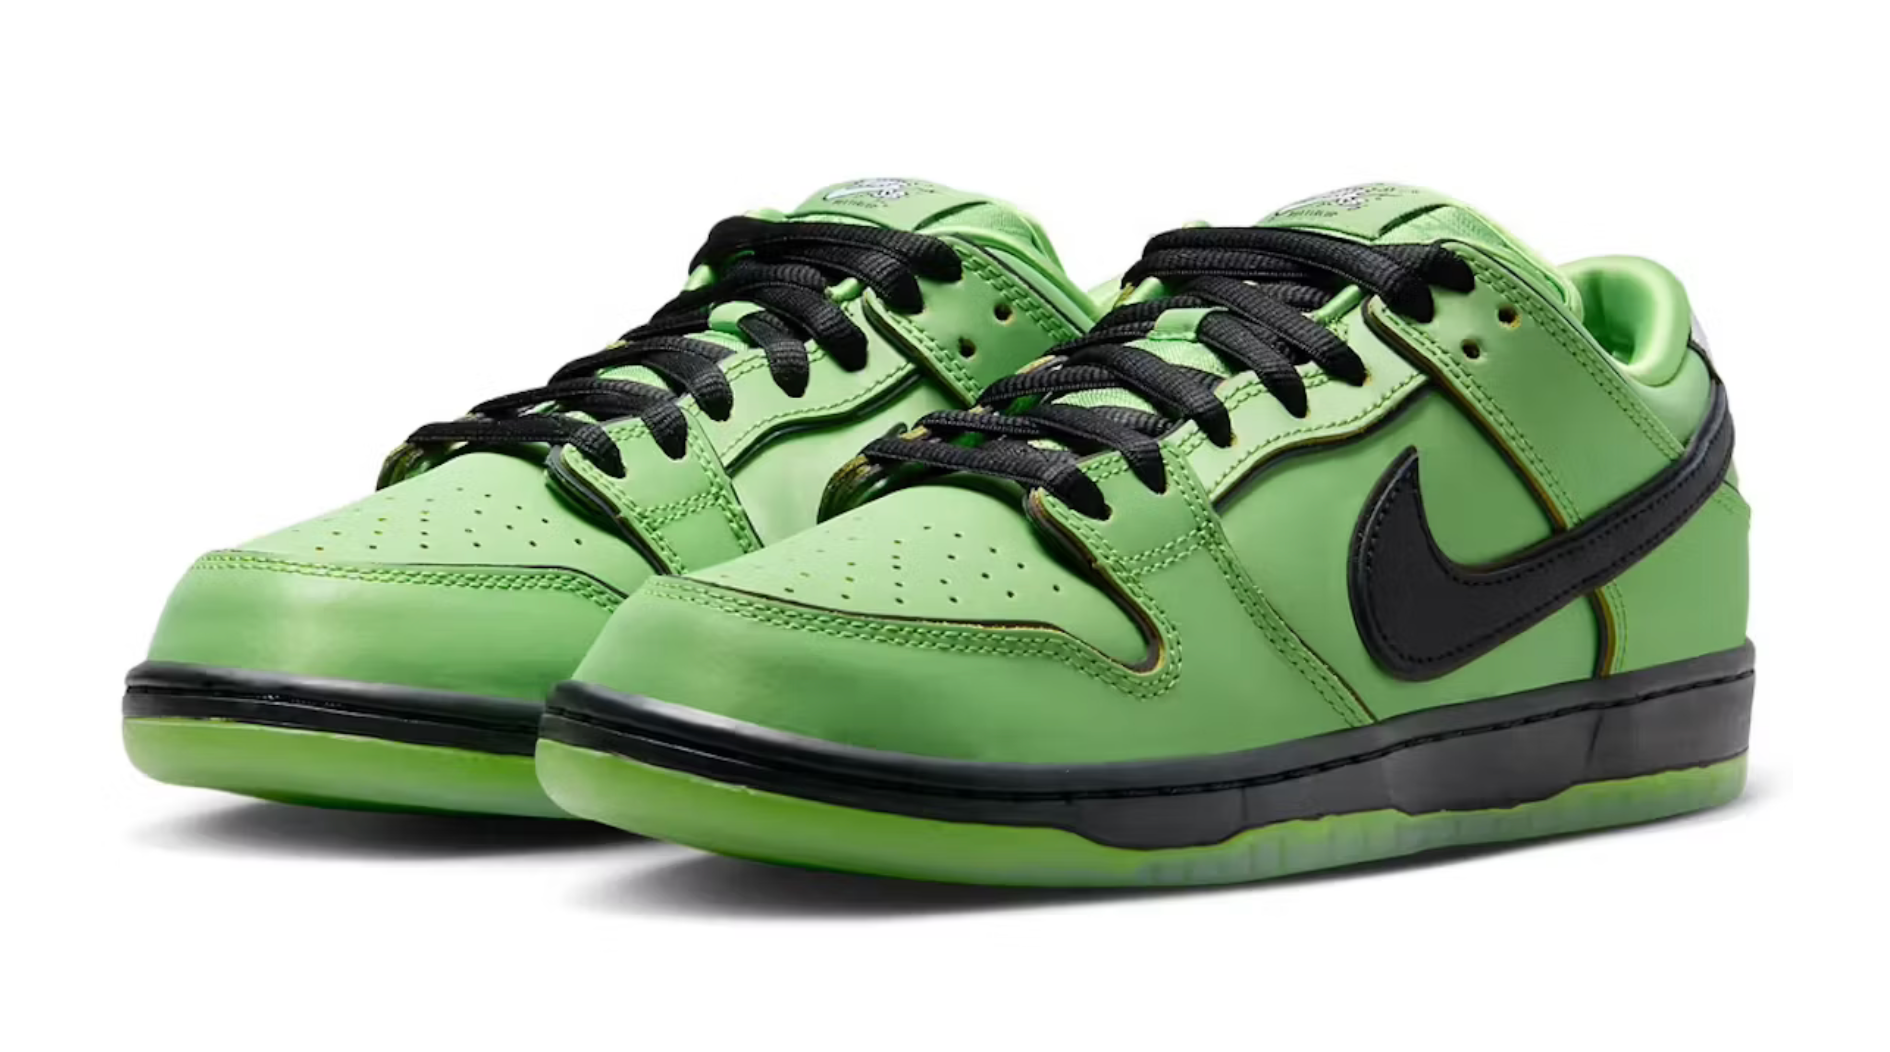 Buy Nike SB: The Dunk Book Book Online at Low Prices in India